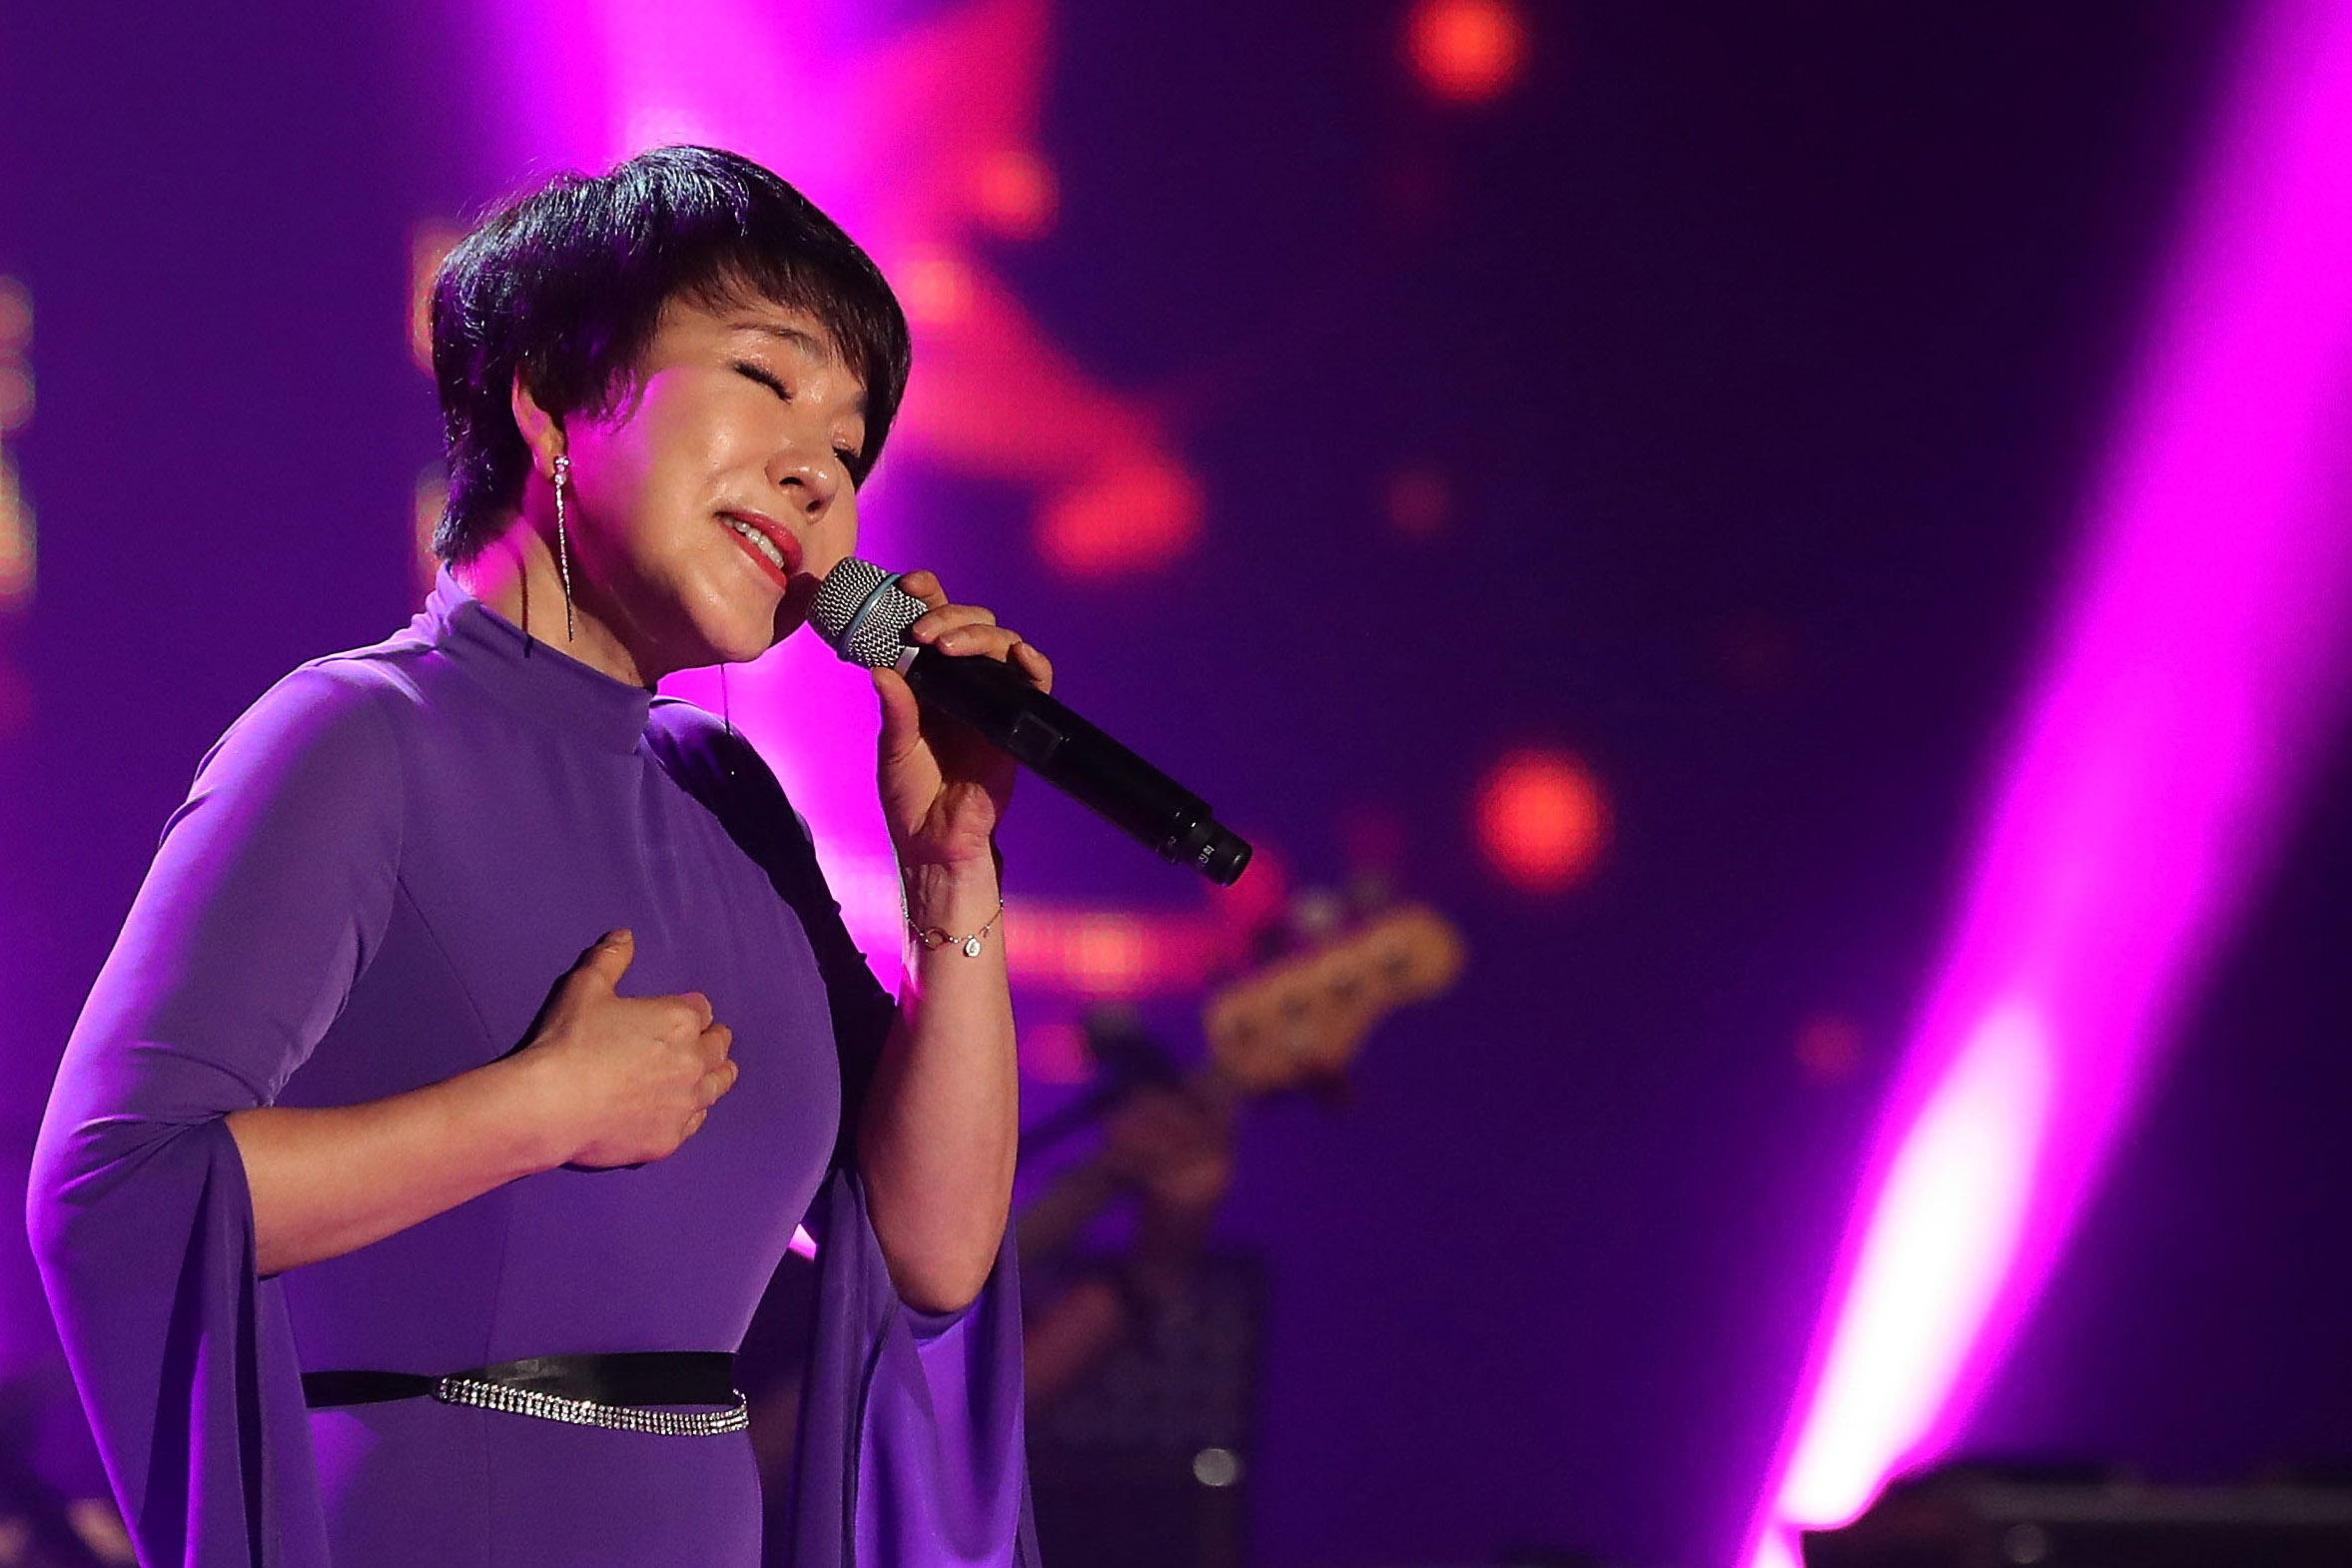 PHOTO: South Korean singer Choi Jin-Hee performs on stage during a concert, April 3, 2018, in Pyongyang, North Korea. South Korean musicians, 160 members in total performed in Pyongyang ahead of the historic inter-Korean summit scheduled for late April.